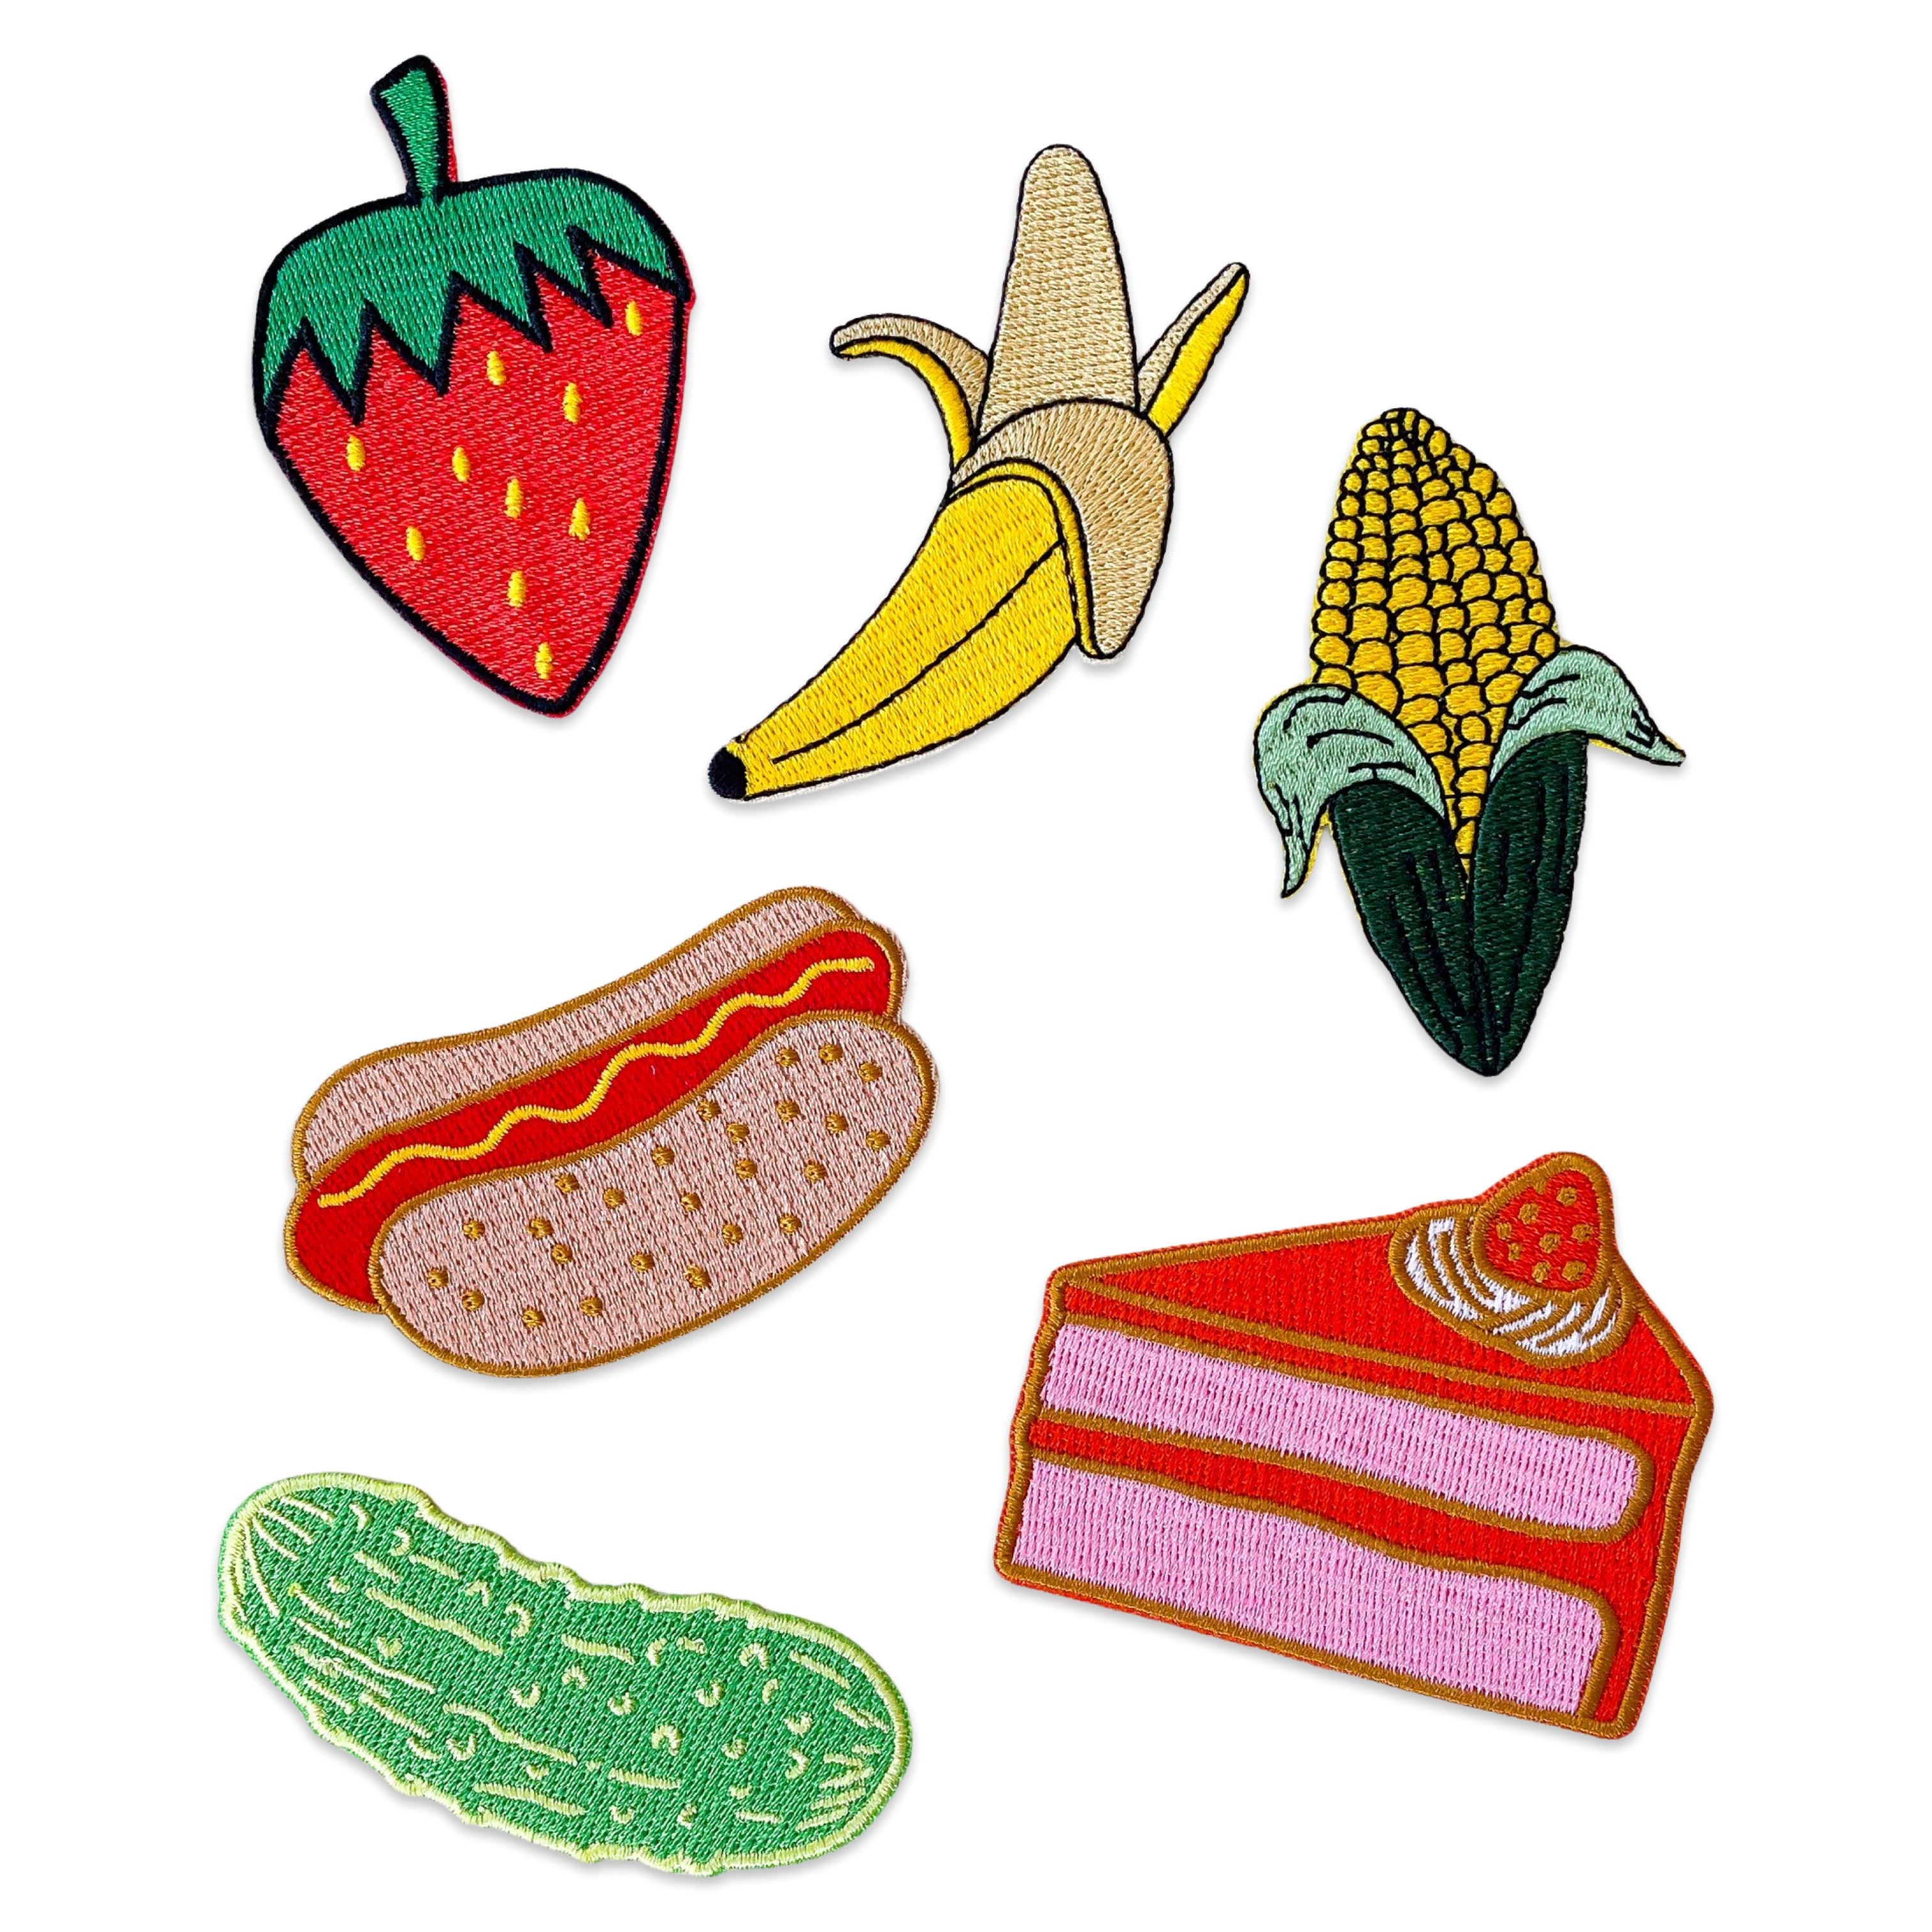 20Pcs Iron on Patches Strawberry Patches for Clothing Embroidered Patches  Clothing Accessories 